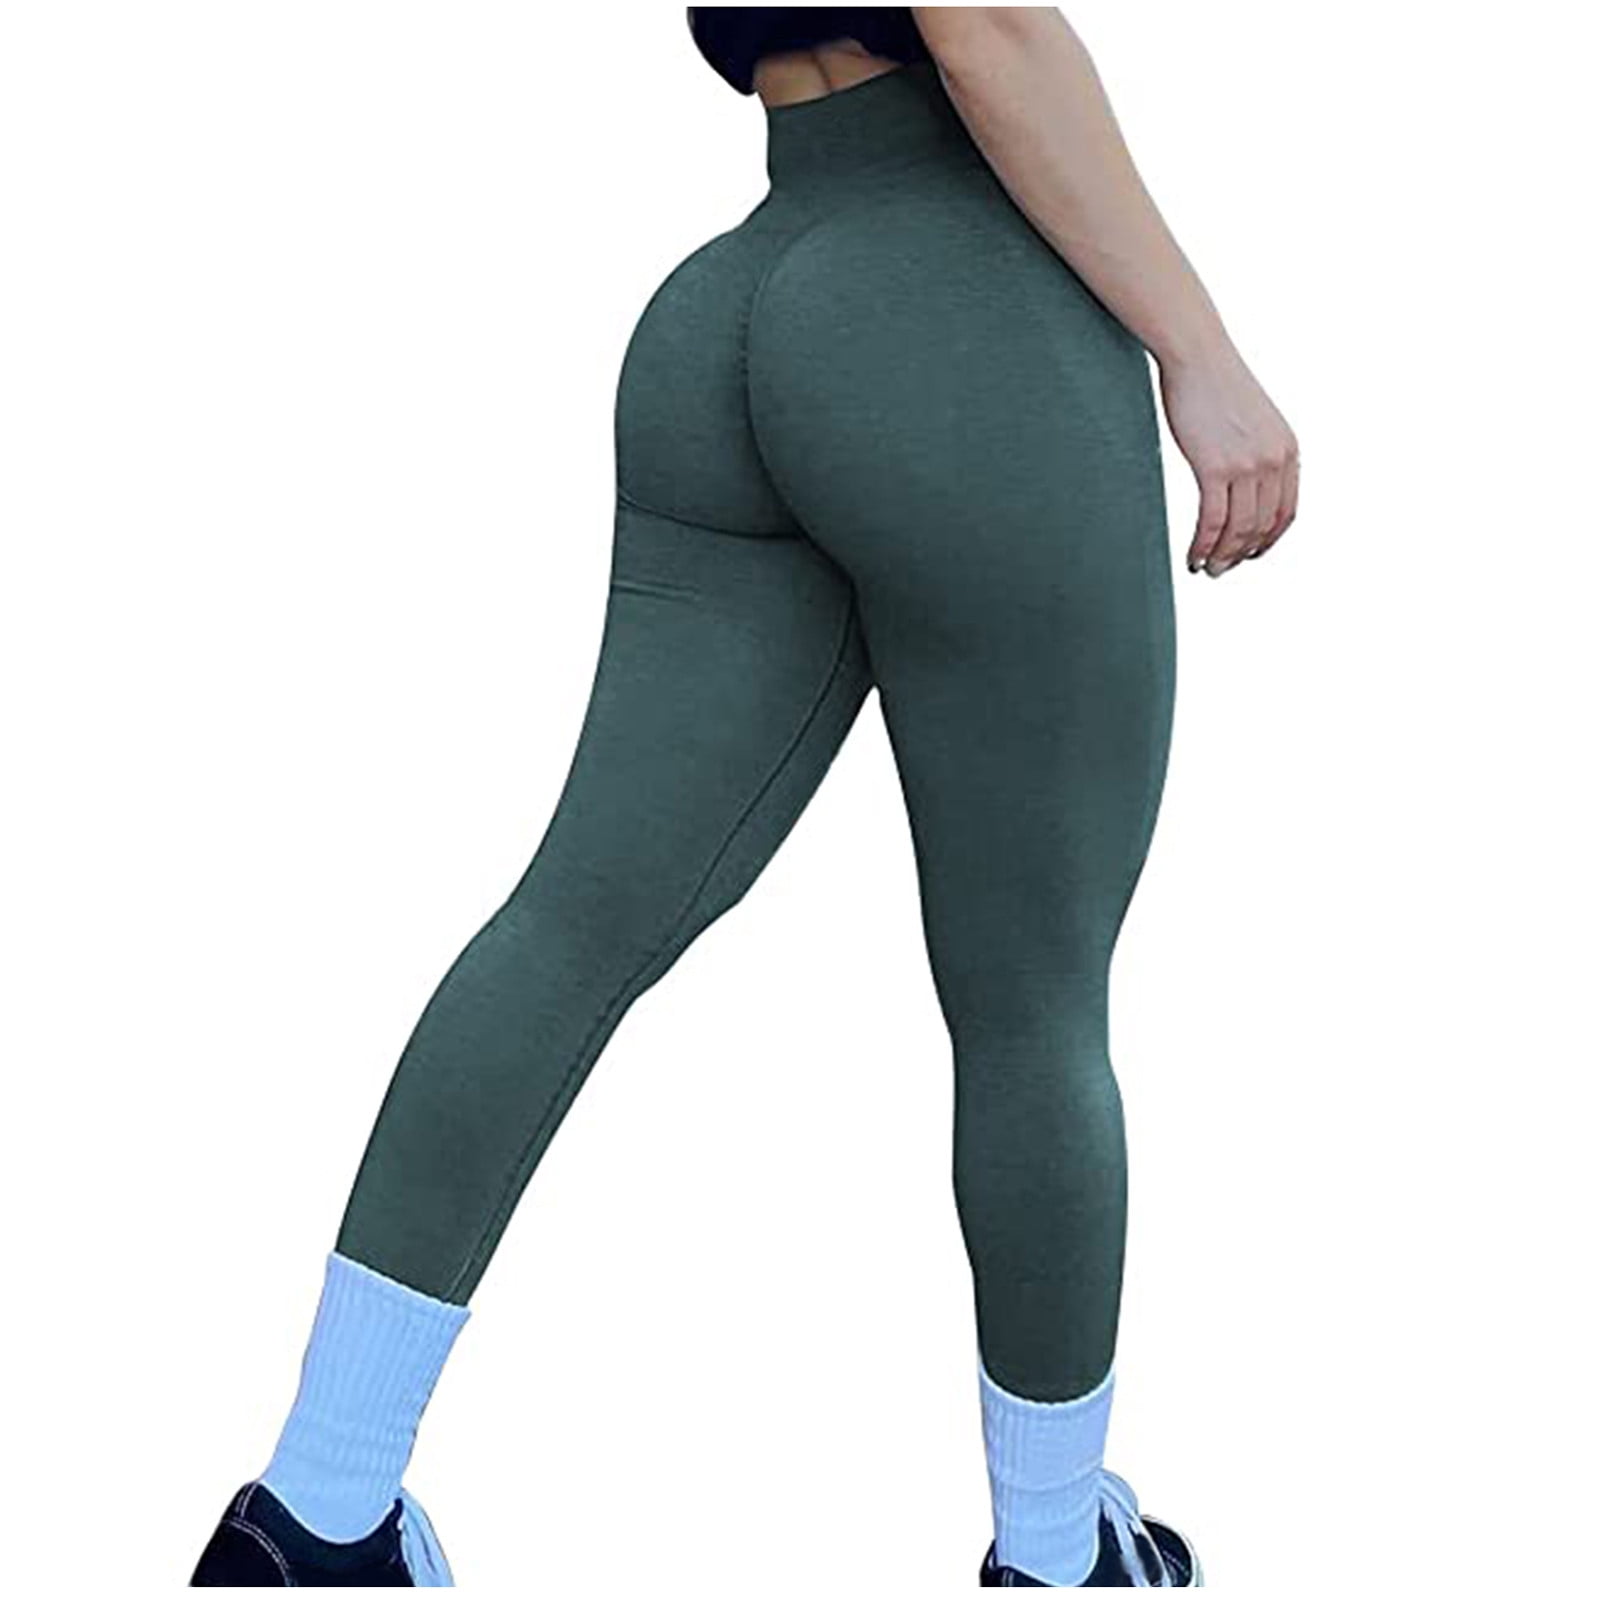 Aueoeo Cute Clothes for Teen Girls, Tummy Control Leggings Women Printing  Warm Tight Thick Plush Wool Waist Full Length Pants Trousers Leggings